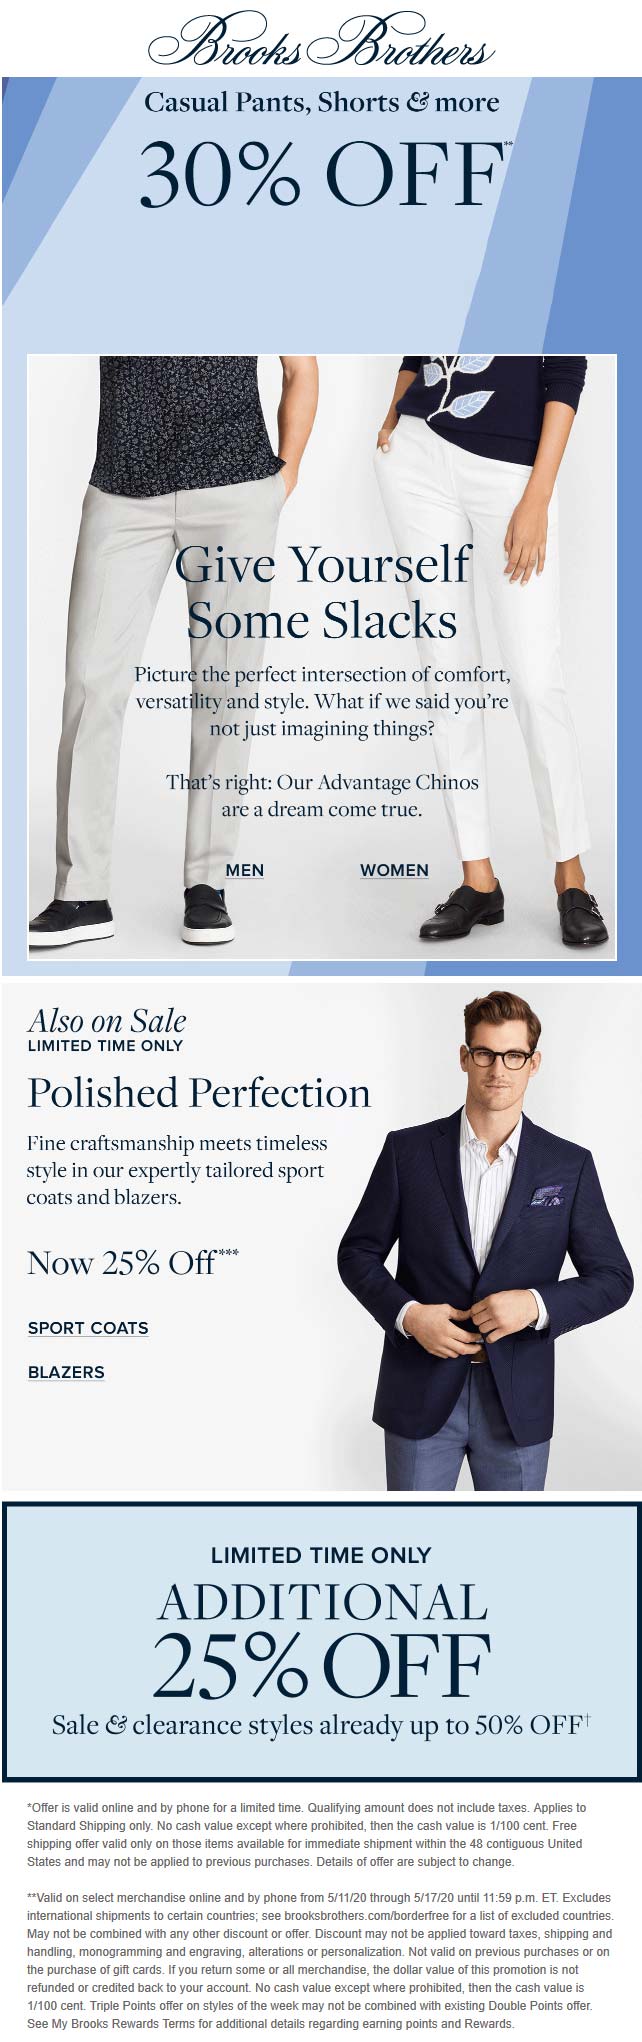 Brooks Brothers stores Coupon  30% off shorts & pants & 25% off sale items at Brooks Brothers #brooksbrothers